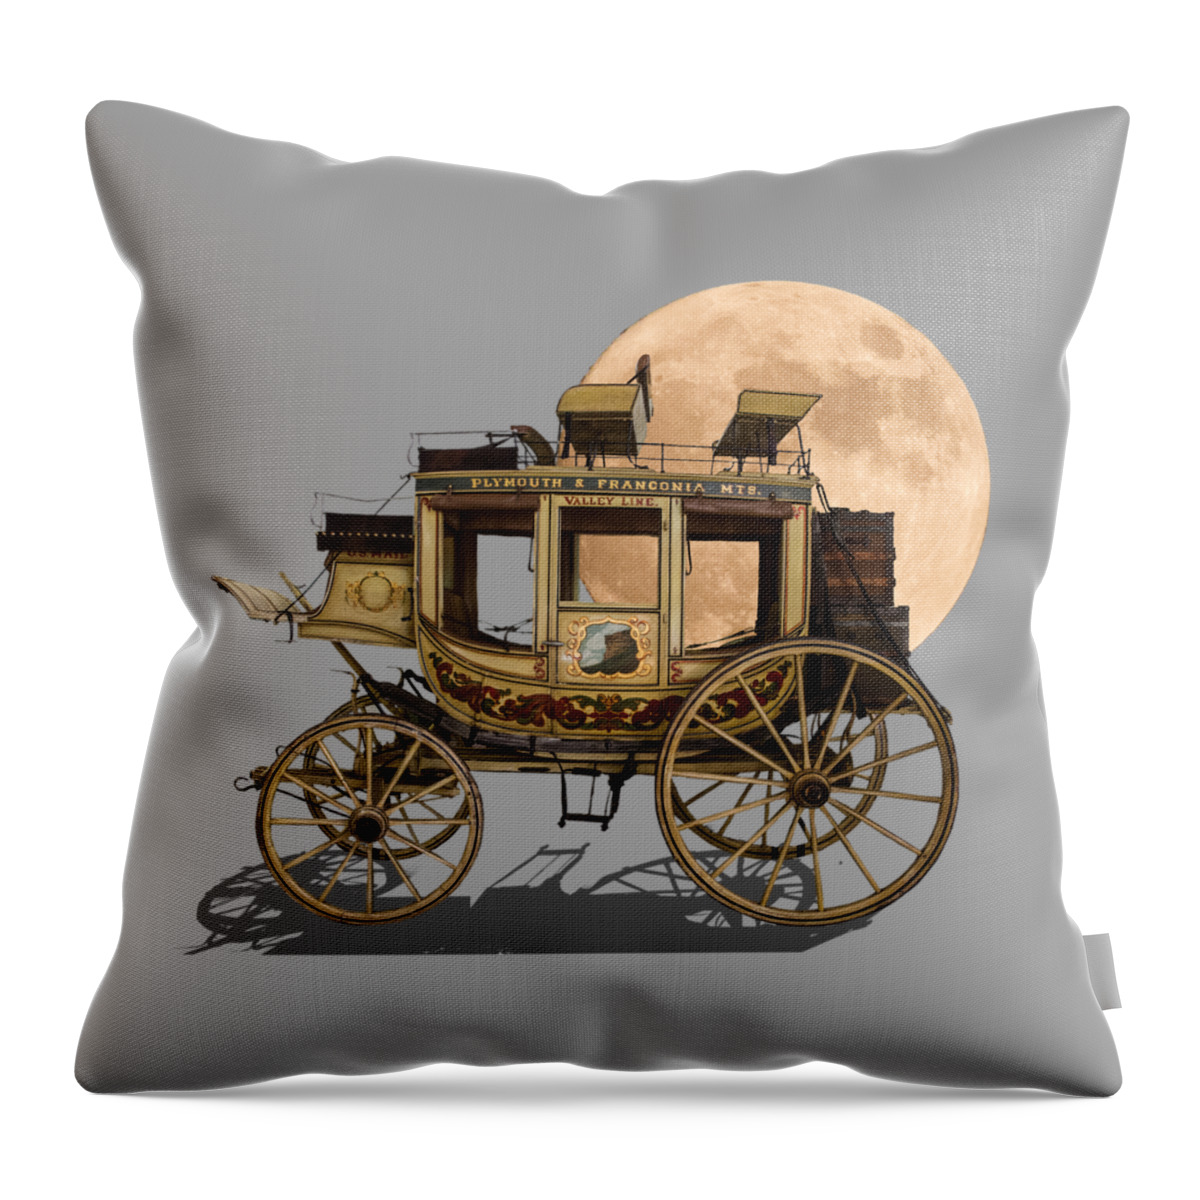 Transparent Background Throw Pillow featuring the photograph The Old Stage Coach by John Haldane